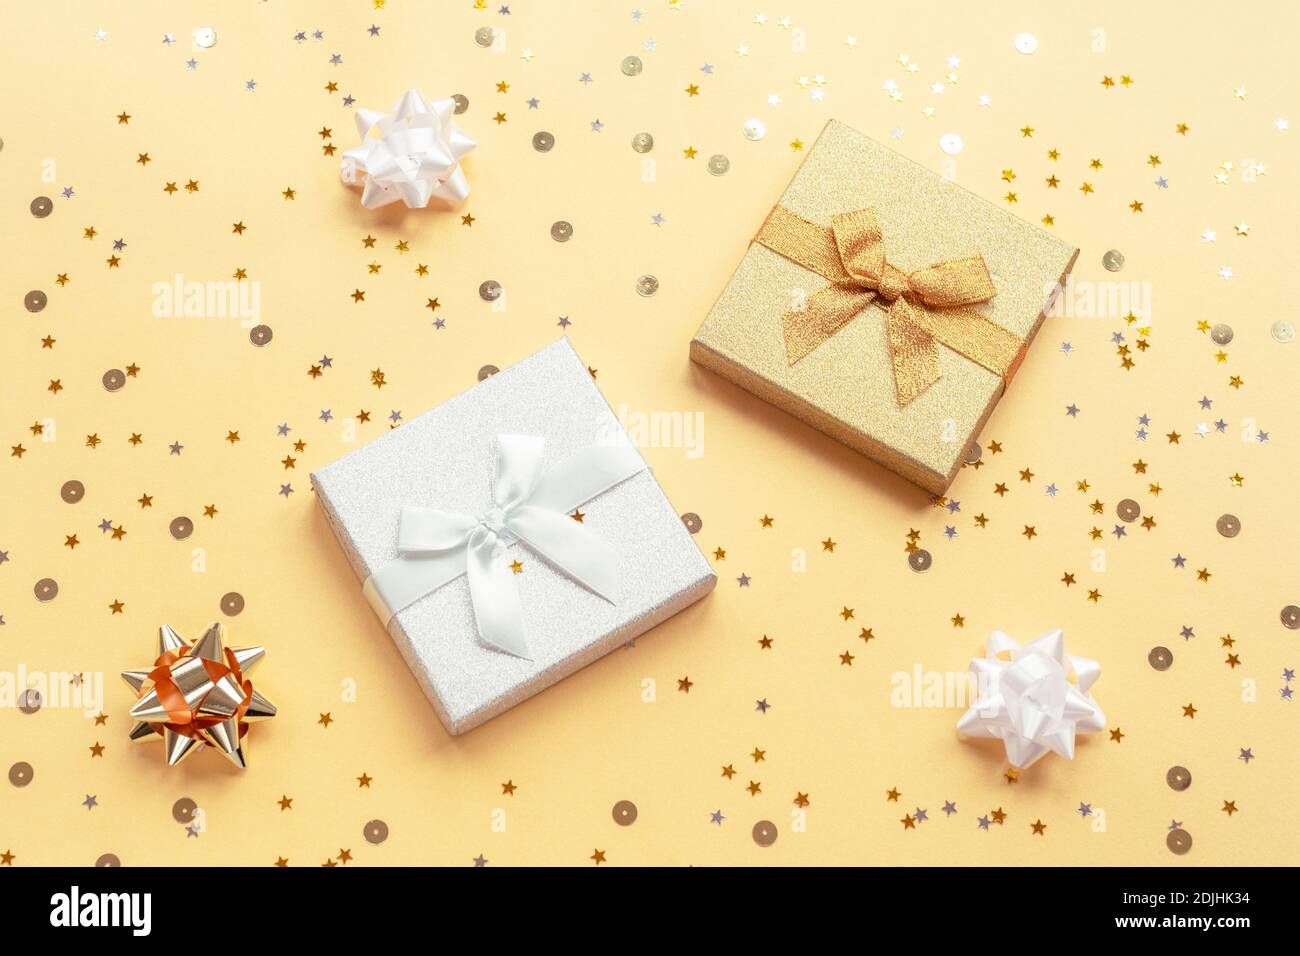 Two gifts in boxes on yellow backgound with baubles and confetti. Christmas, New Year concept. Top view, flat lay. Stock Photo